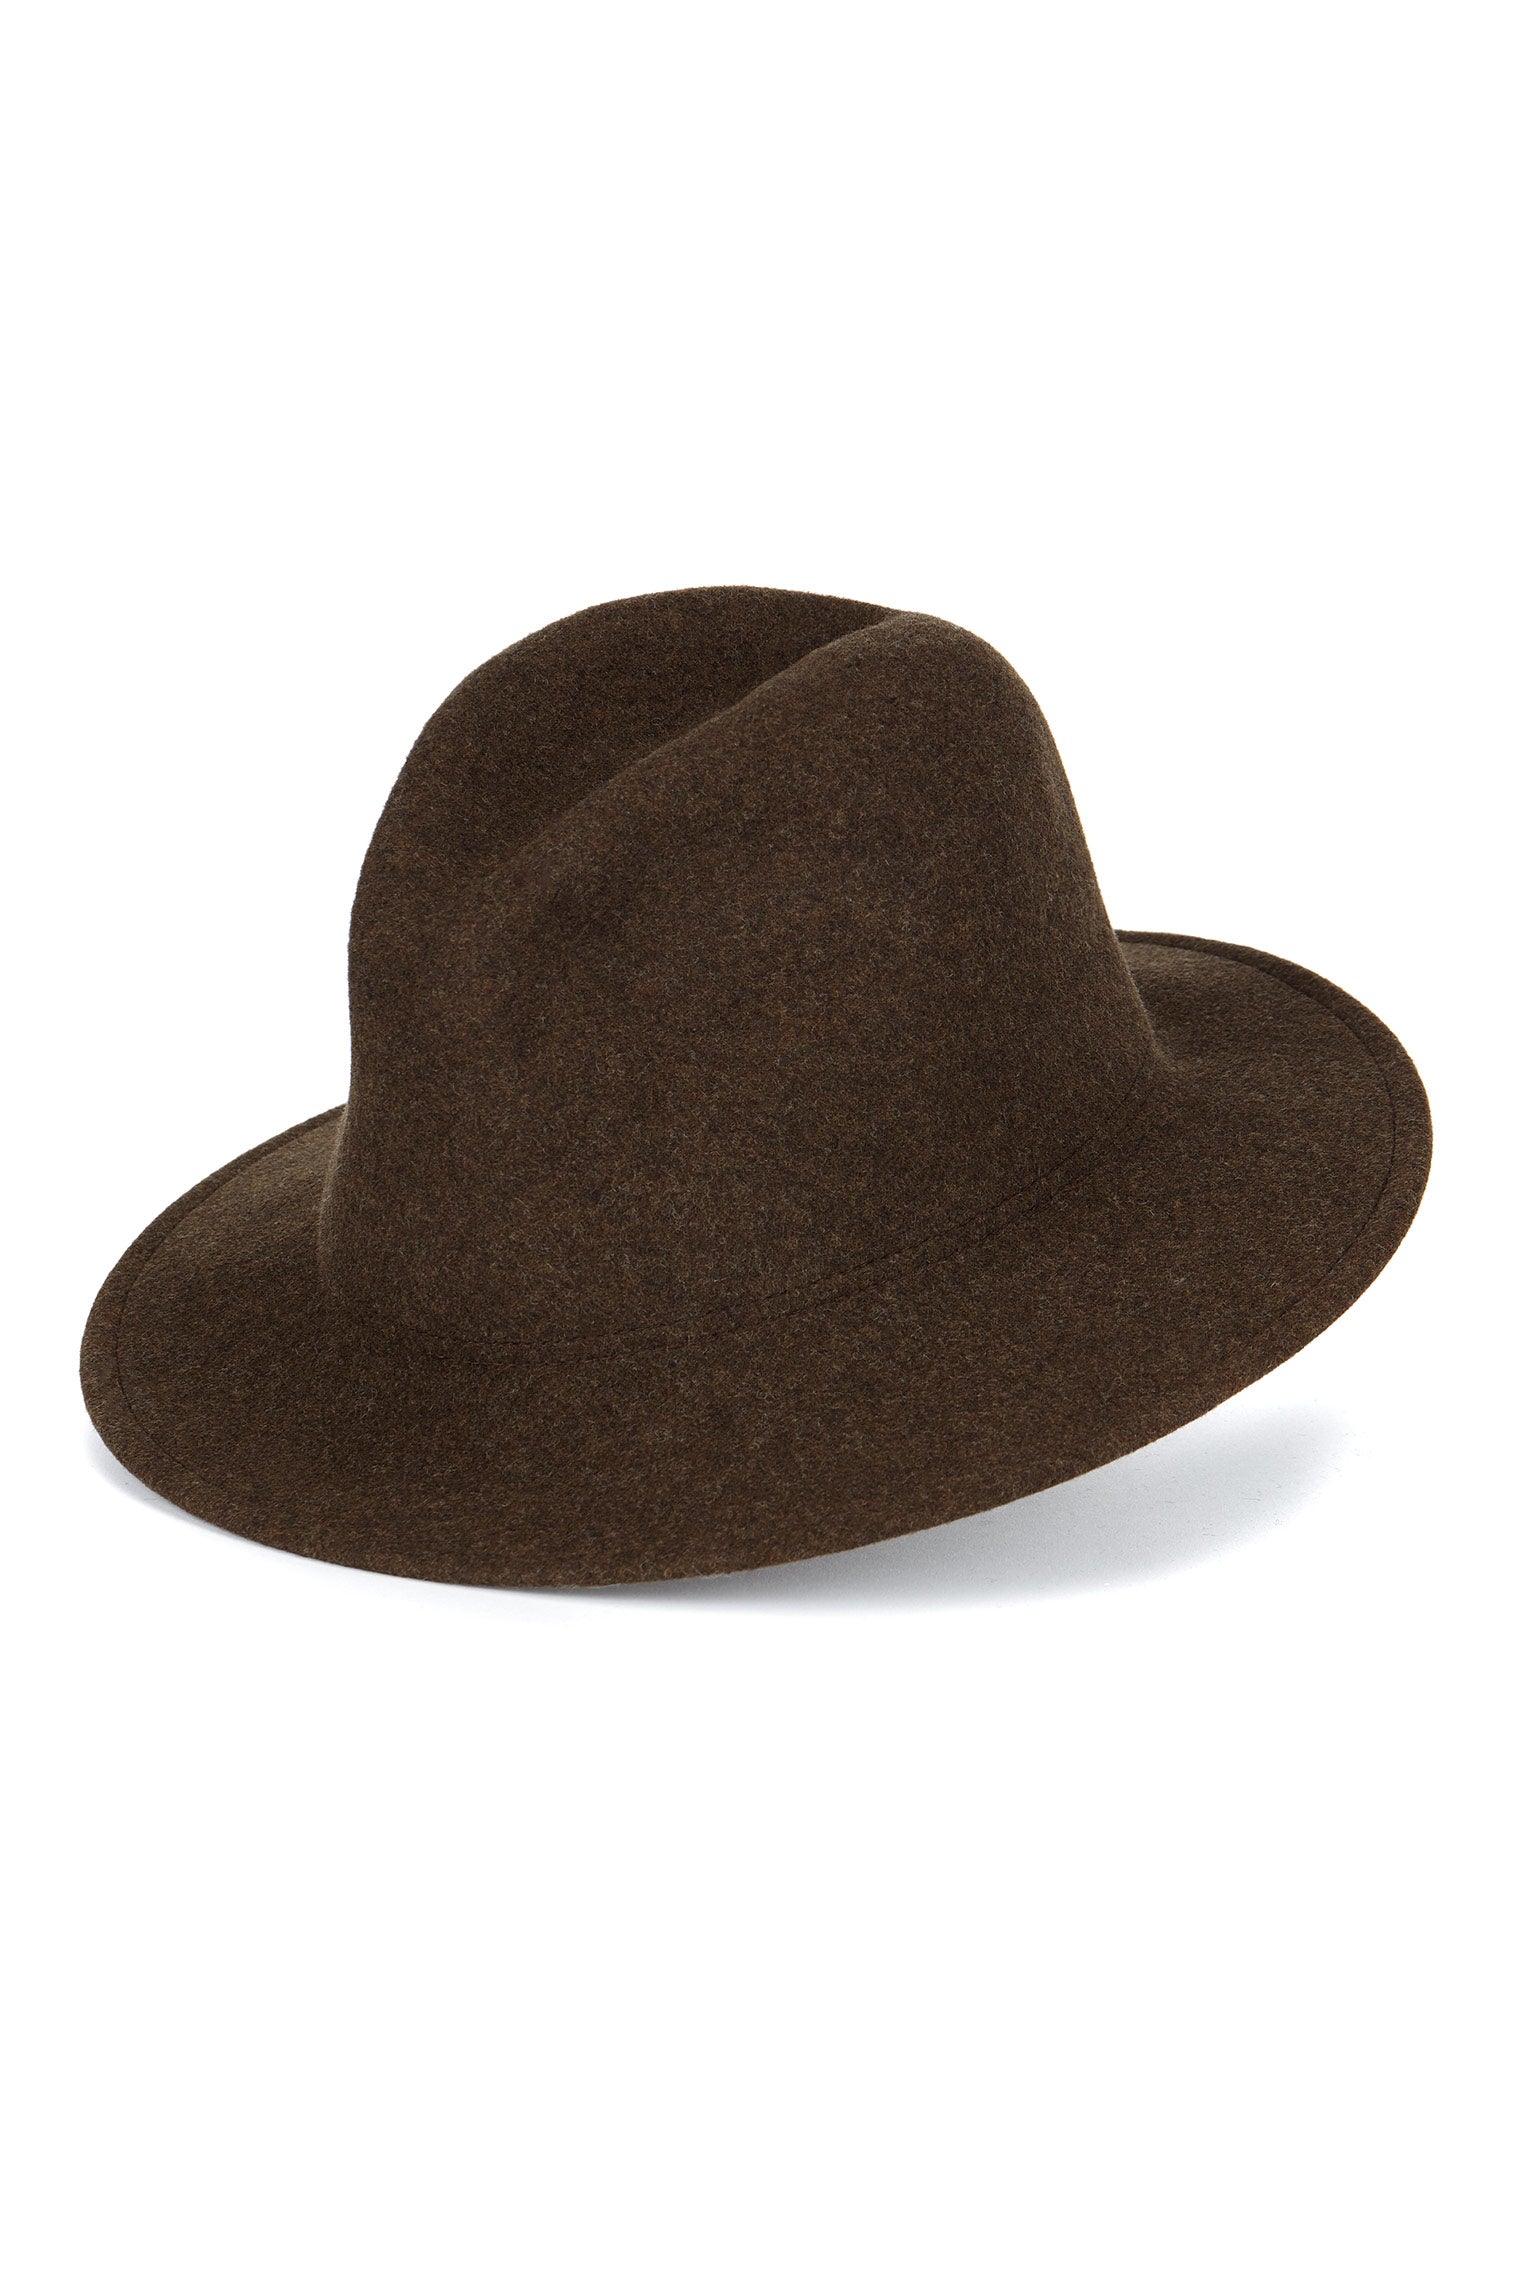 Rambler Rollable Trilby - Valentines Day Gift Ideas - Lock & Co. Hatters London UK